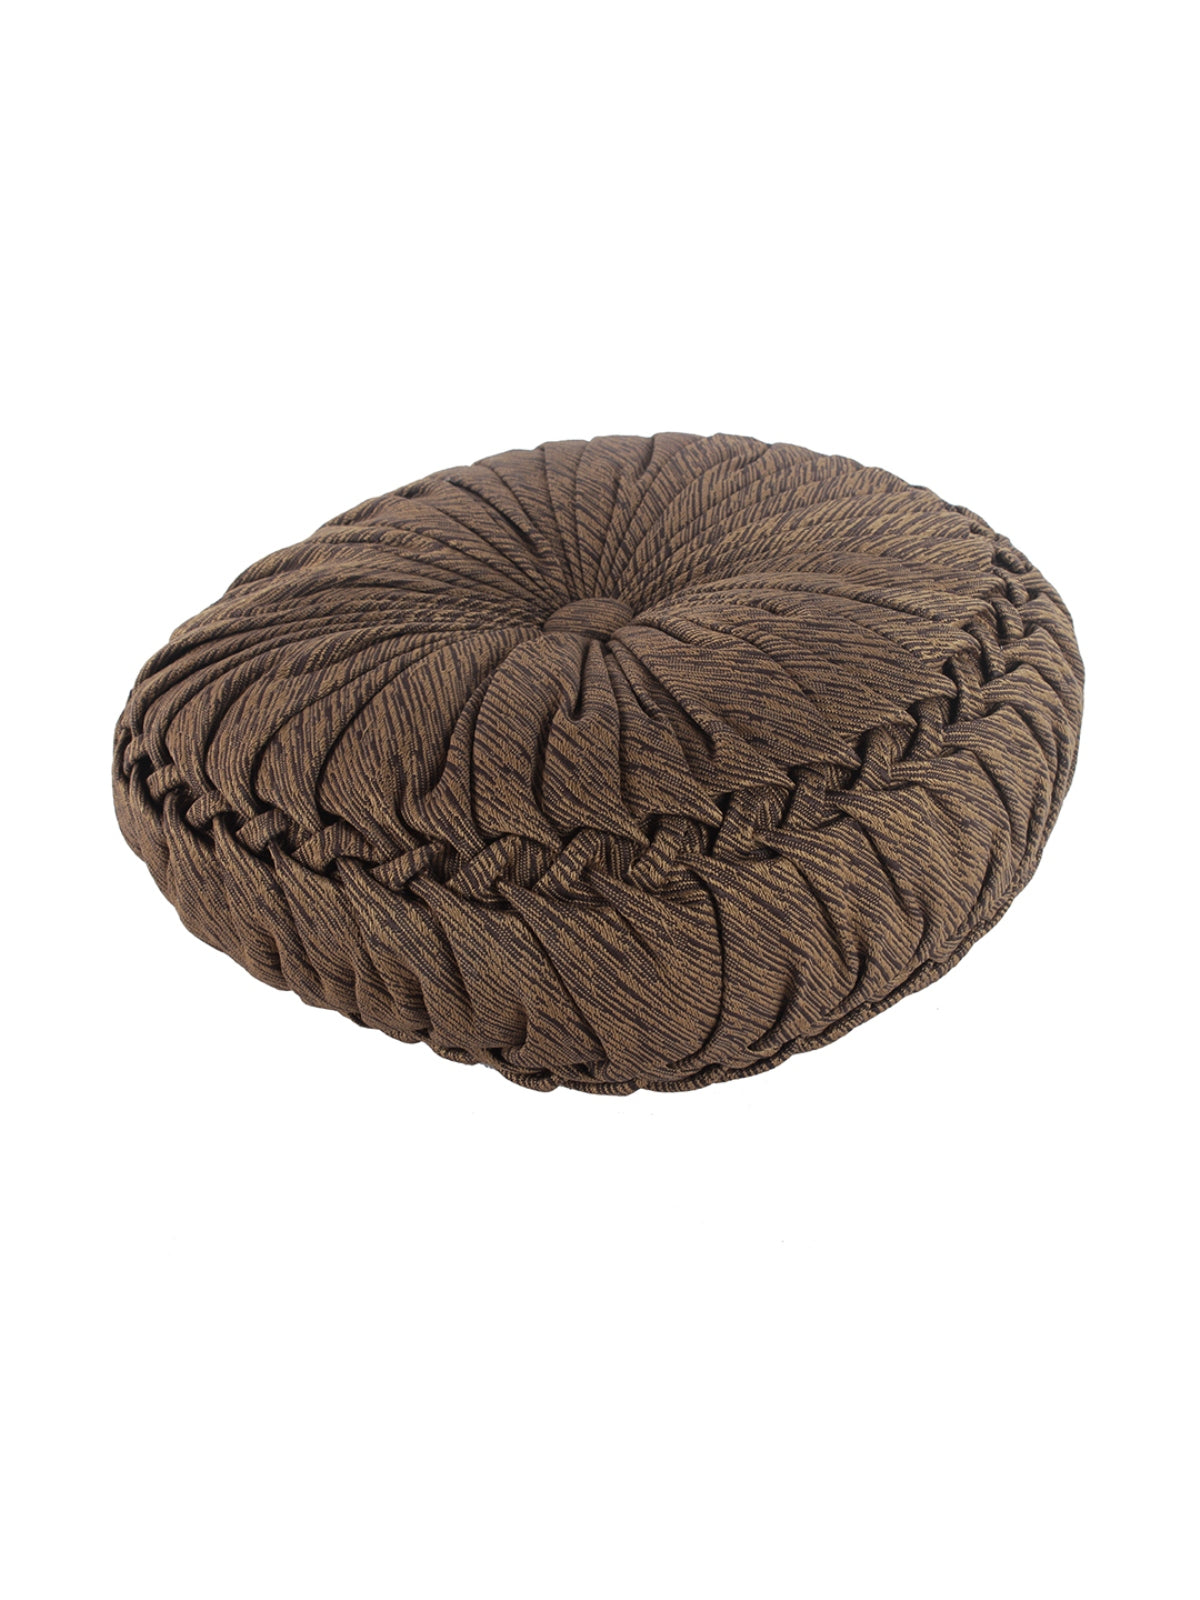 Brown Set of 2 Textured Patterned Round Shape Cushions